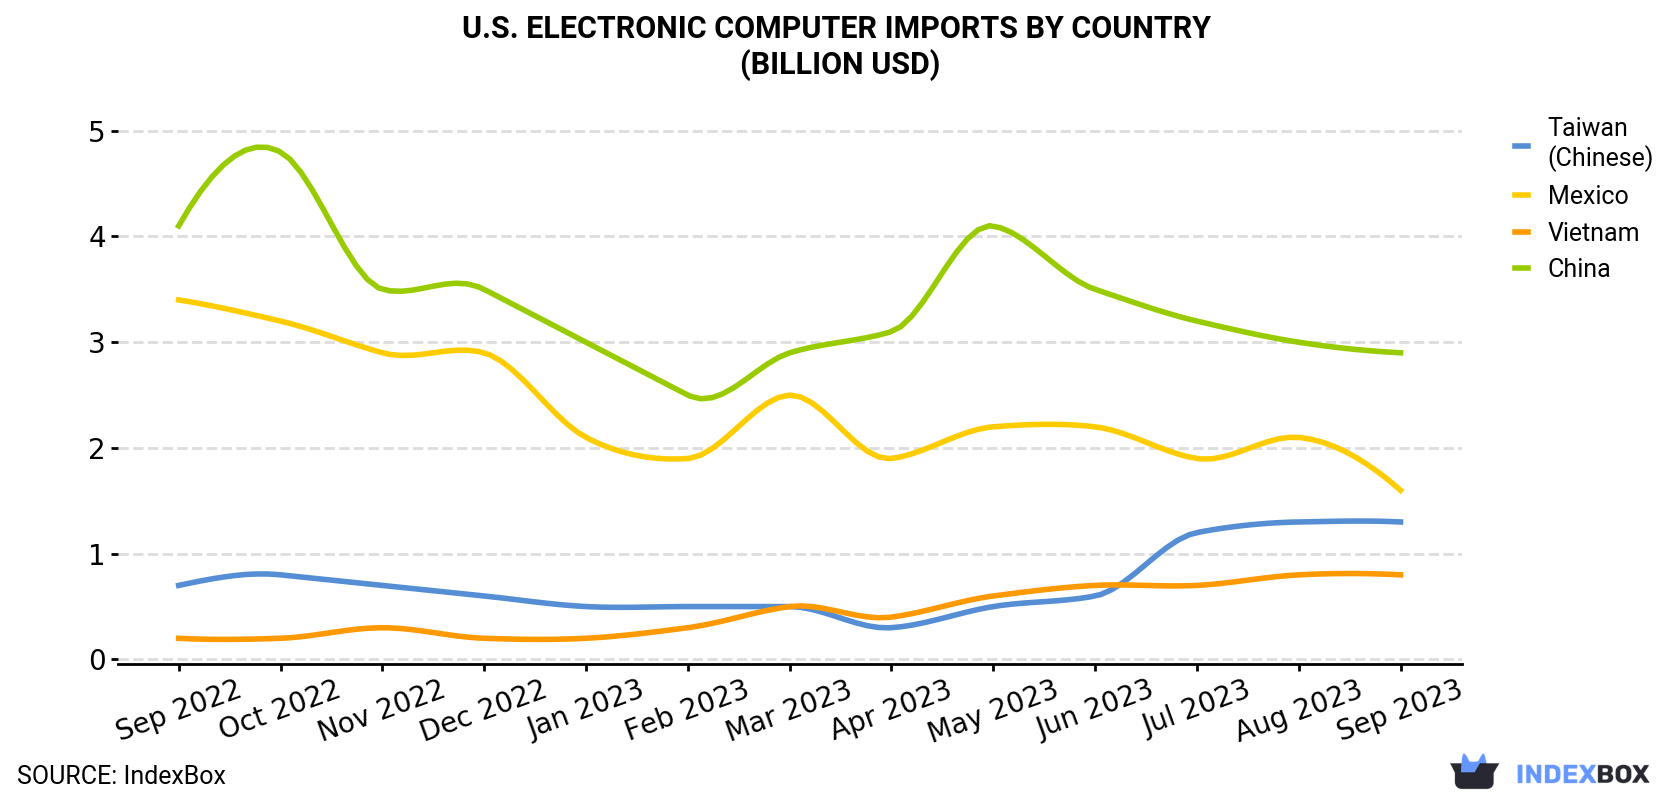 U.S. Electronic Computer Imports By Country (Billion USD)